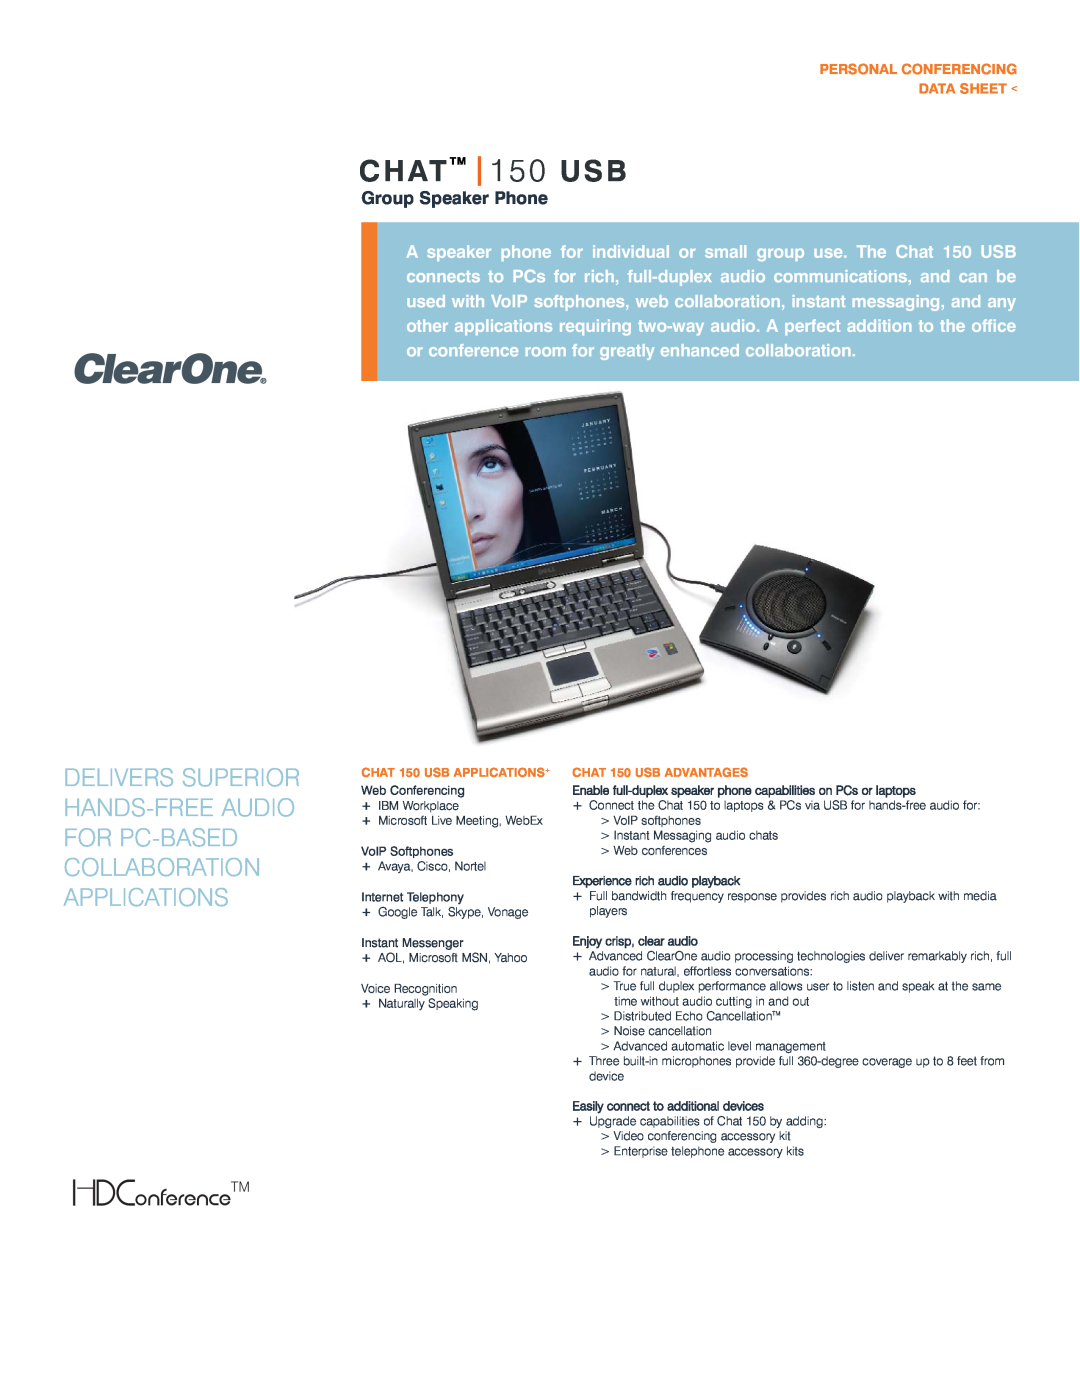 ClearOne comm manual CHATTM 150 USB, Delivers Superior, Hands-Free Audio, For Pc-Based, Collaboration, Applications 